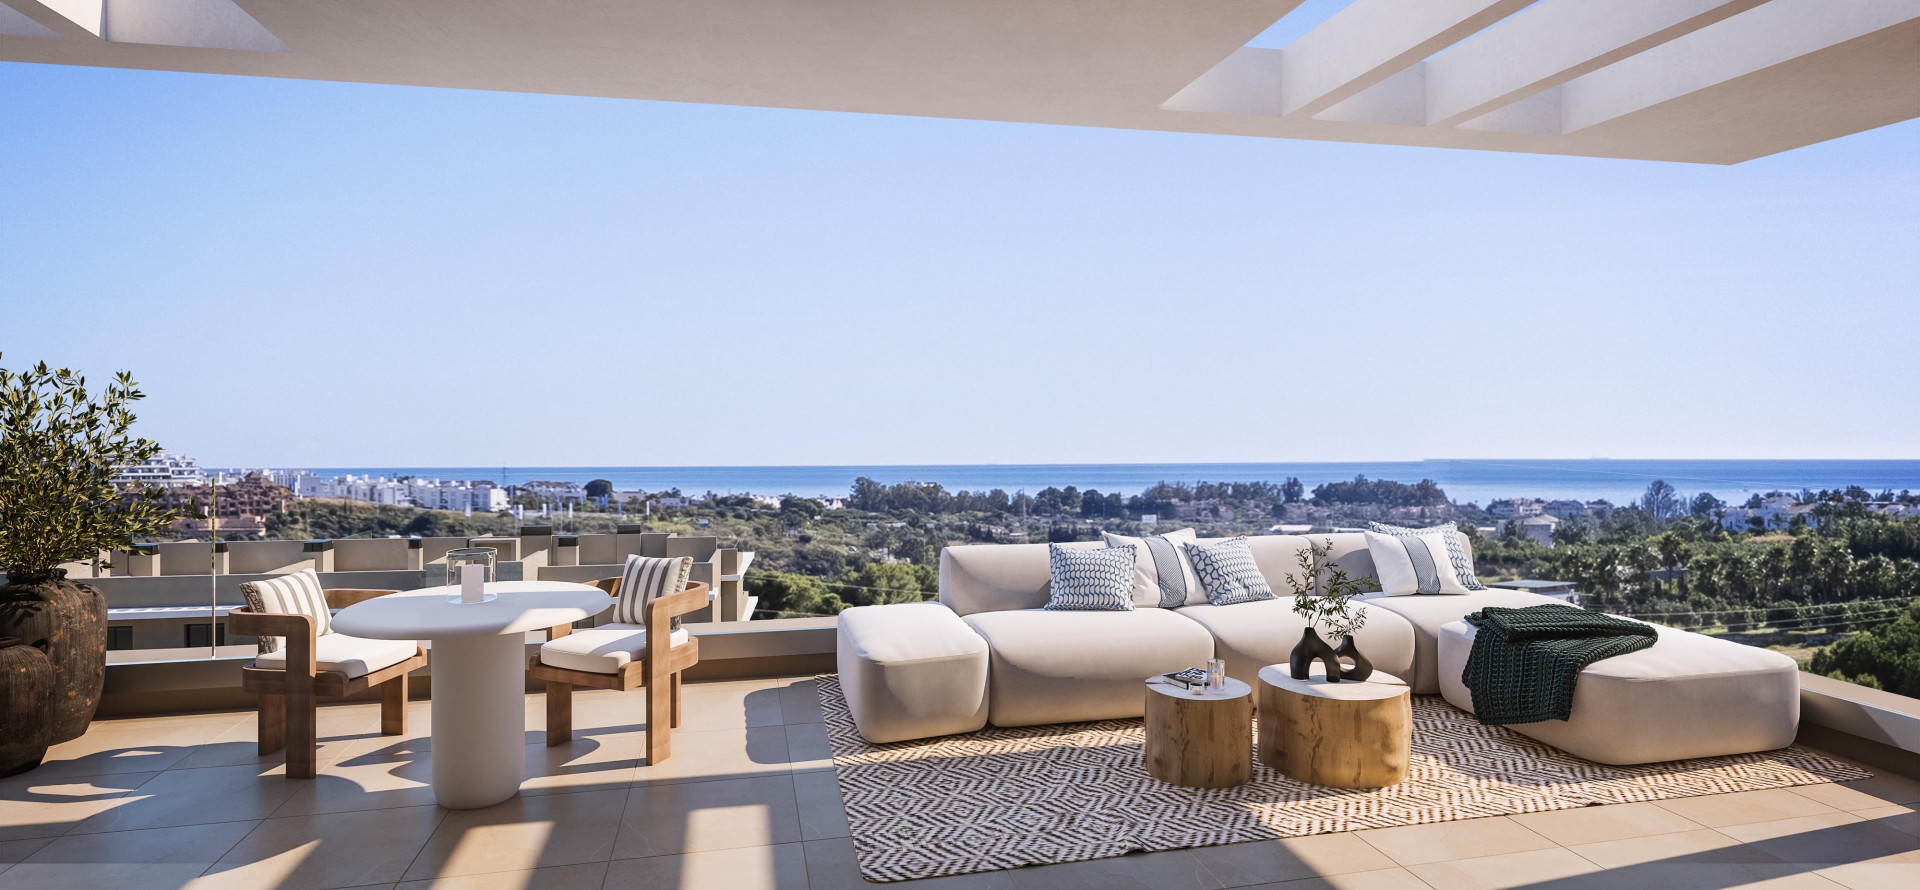 Off plan modern golf apartments and penthouses for sale in Estepona - Costa del Sol